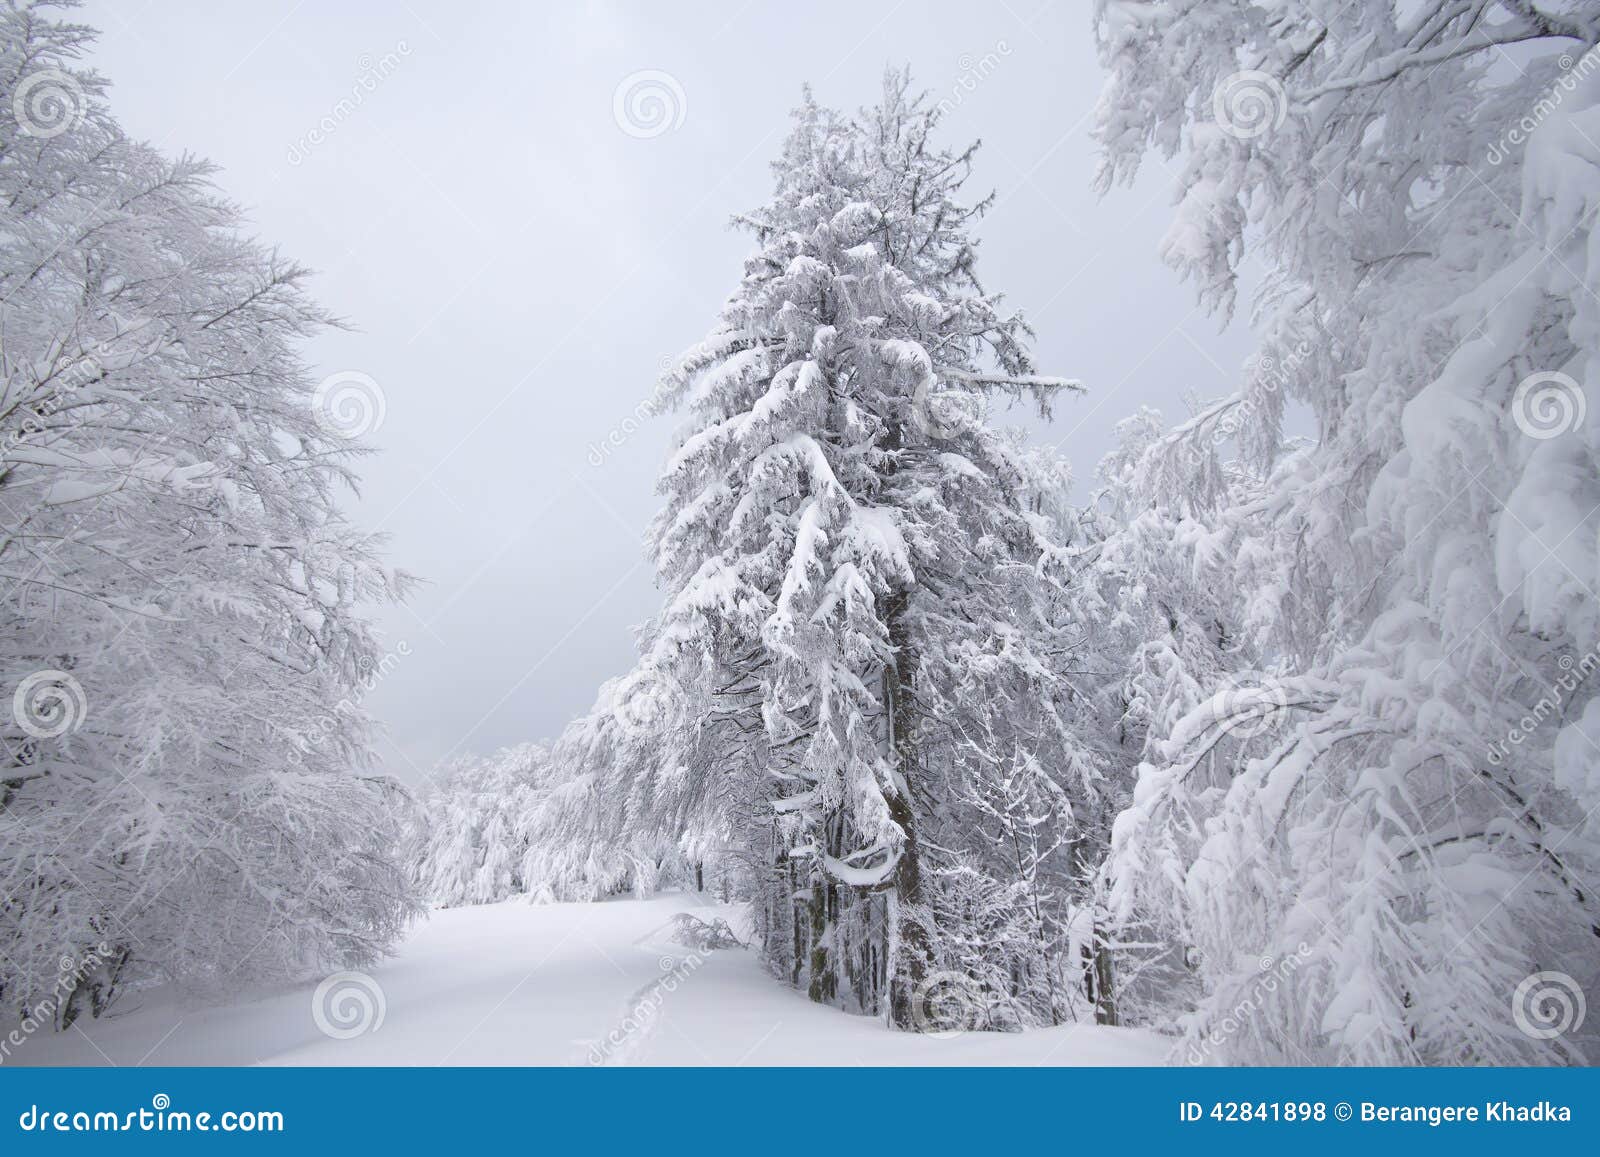 snowy fields, trees and firs, winter in the vosges, france.